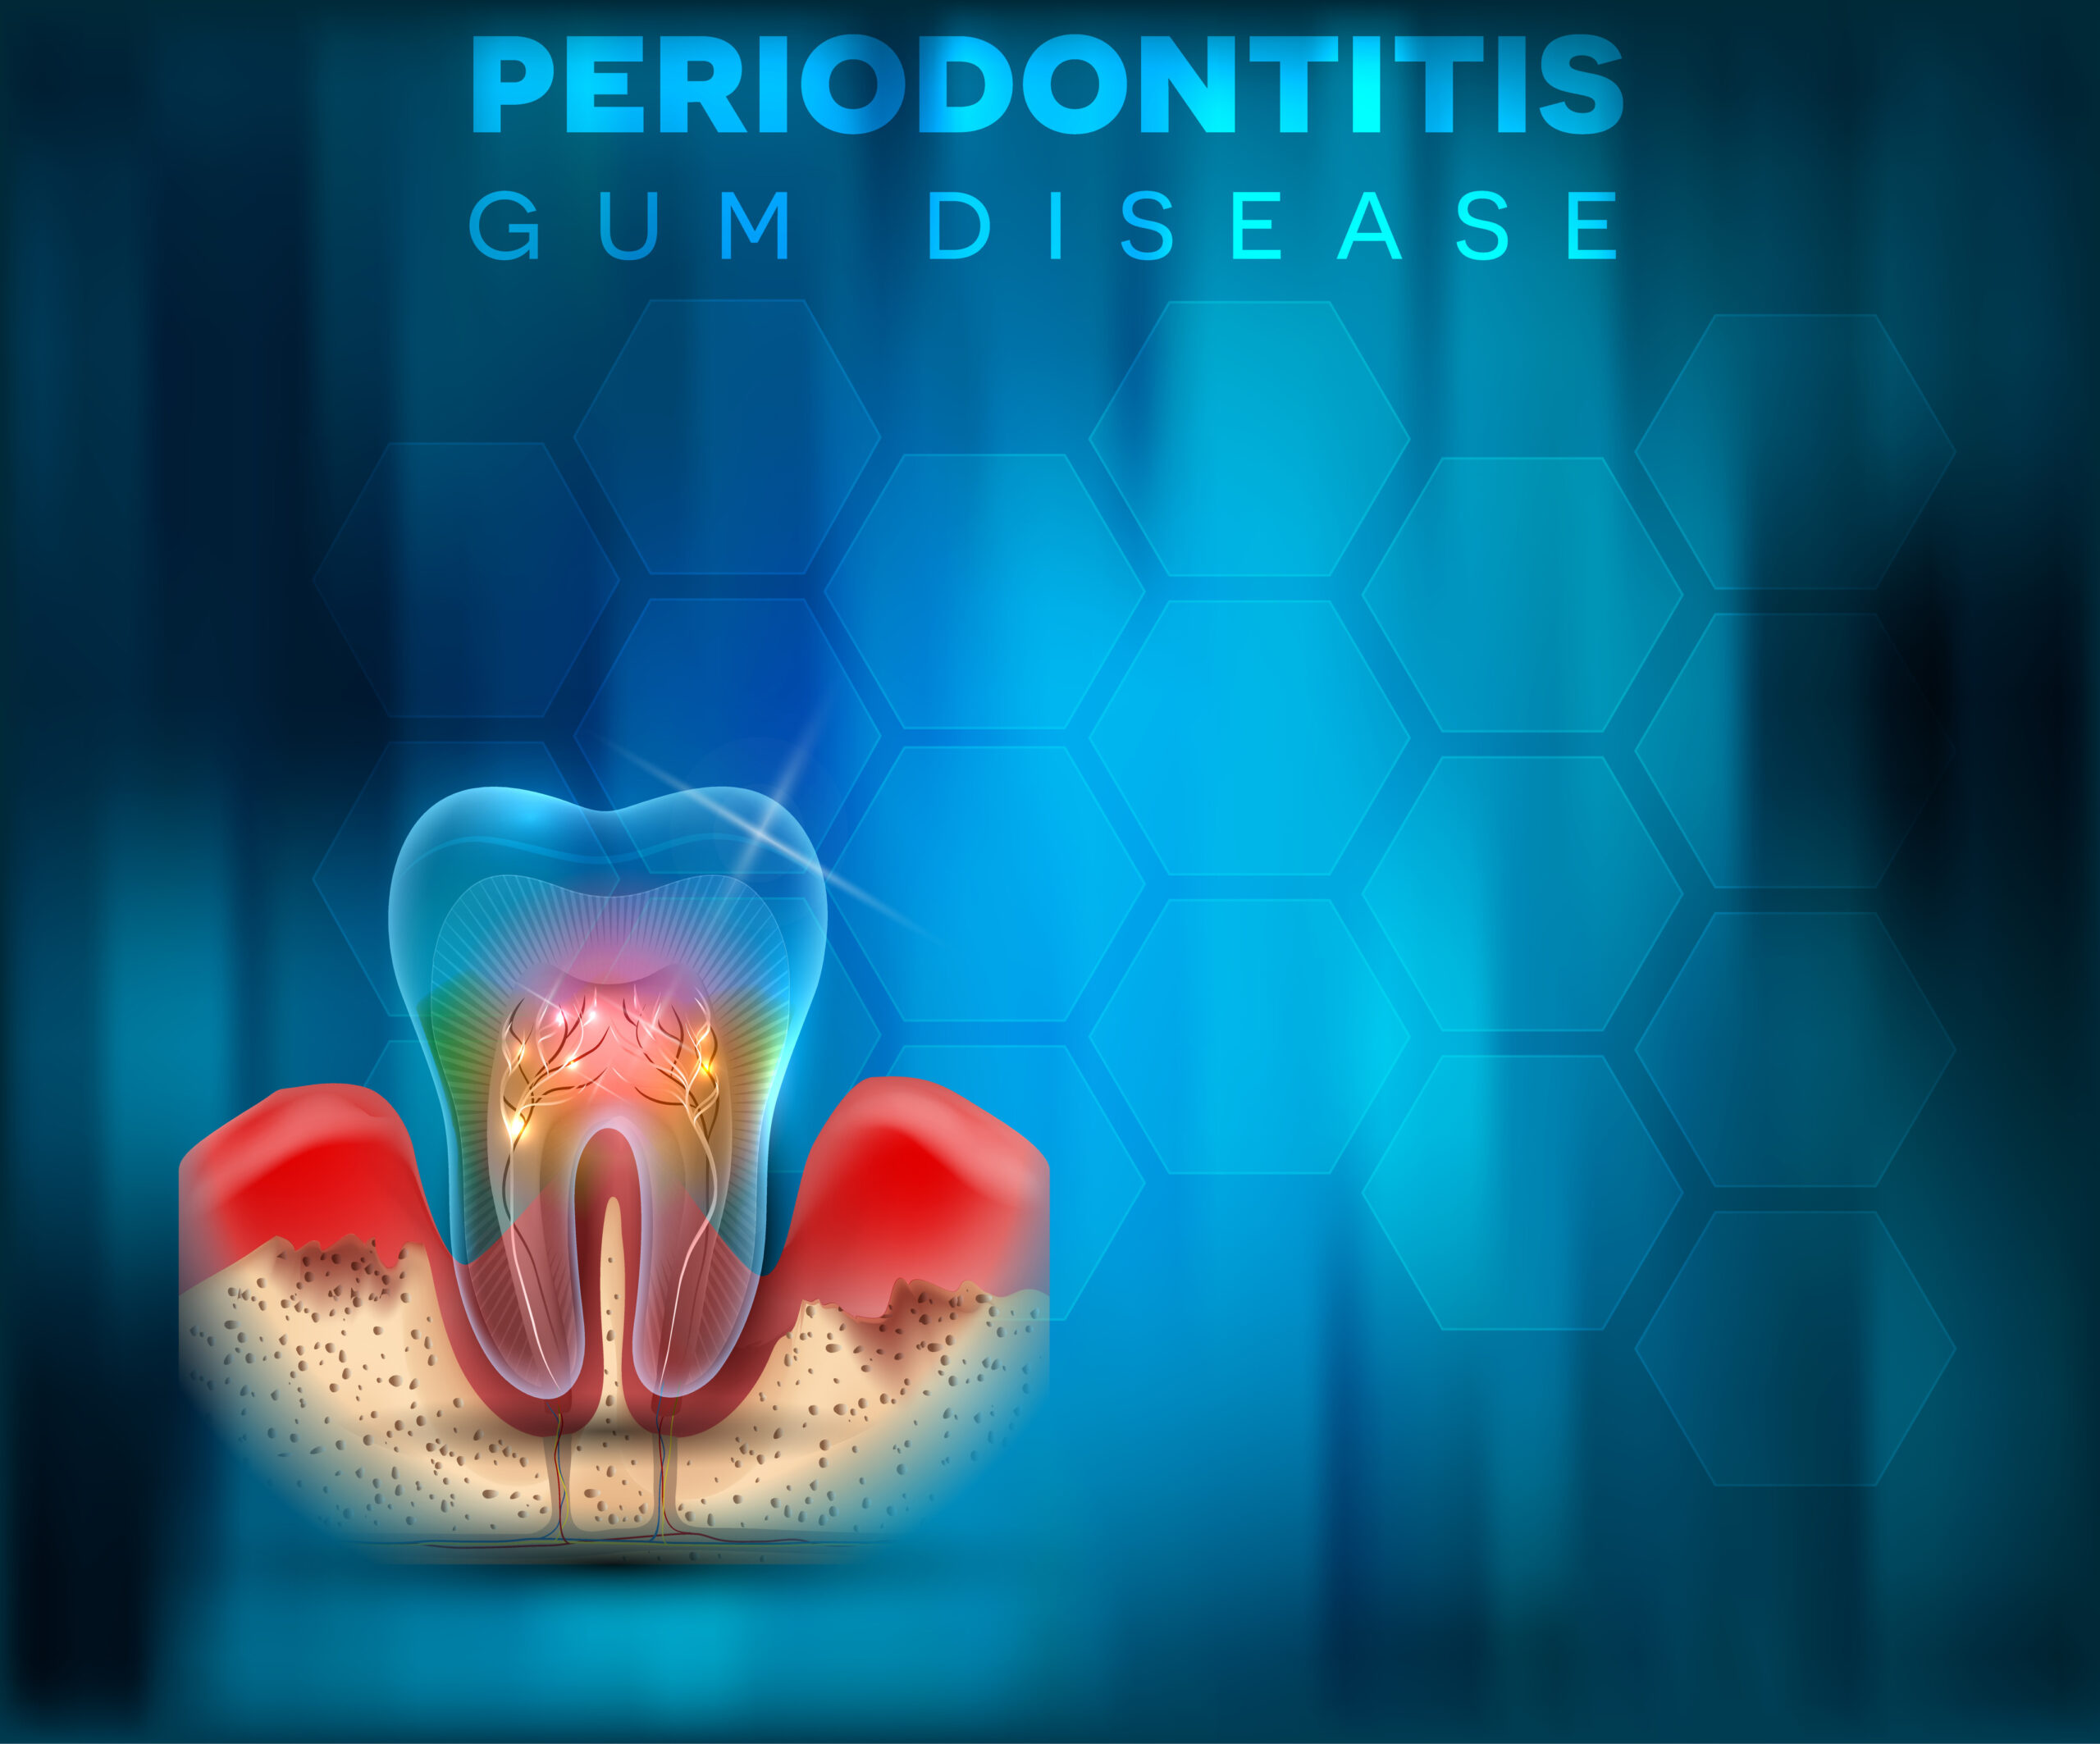 Periodontitis gum disease poster, inflammation of the gums on a bright blue mesh background